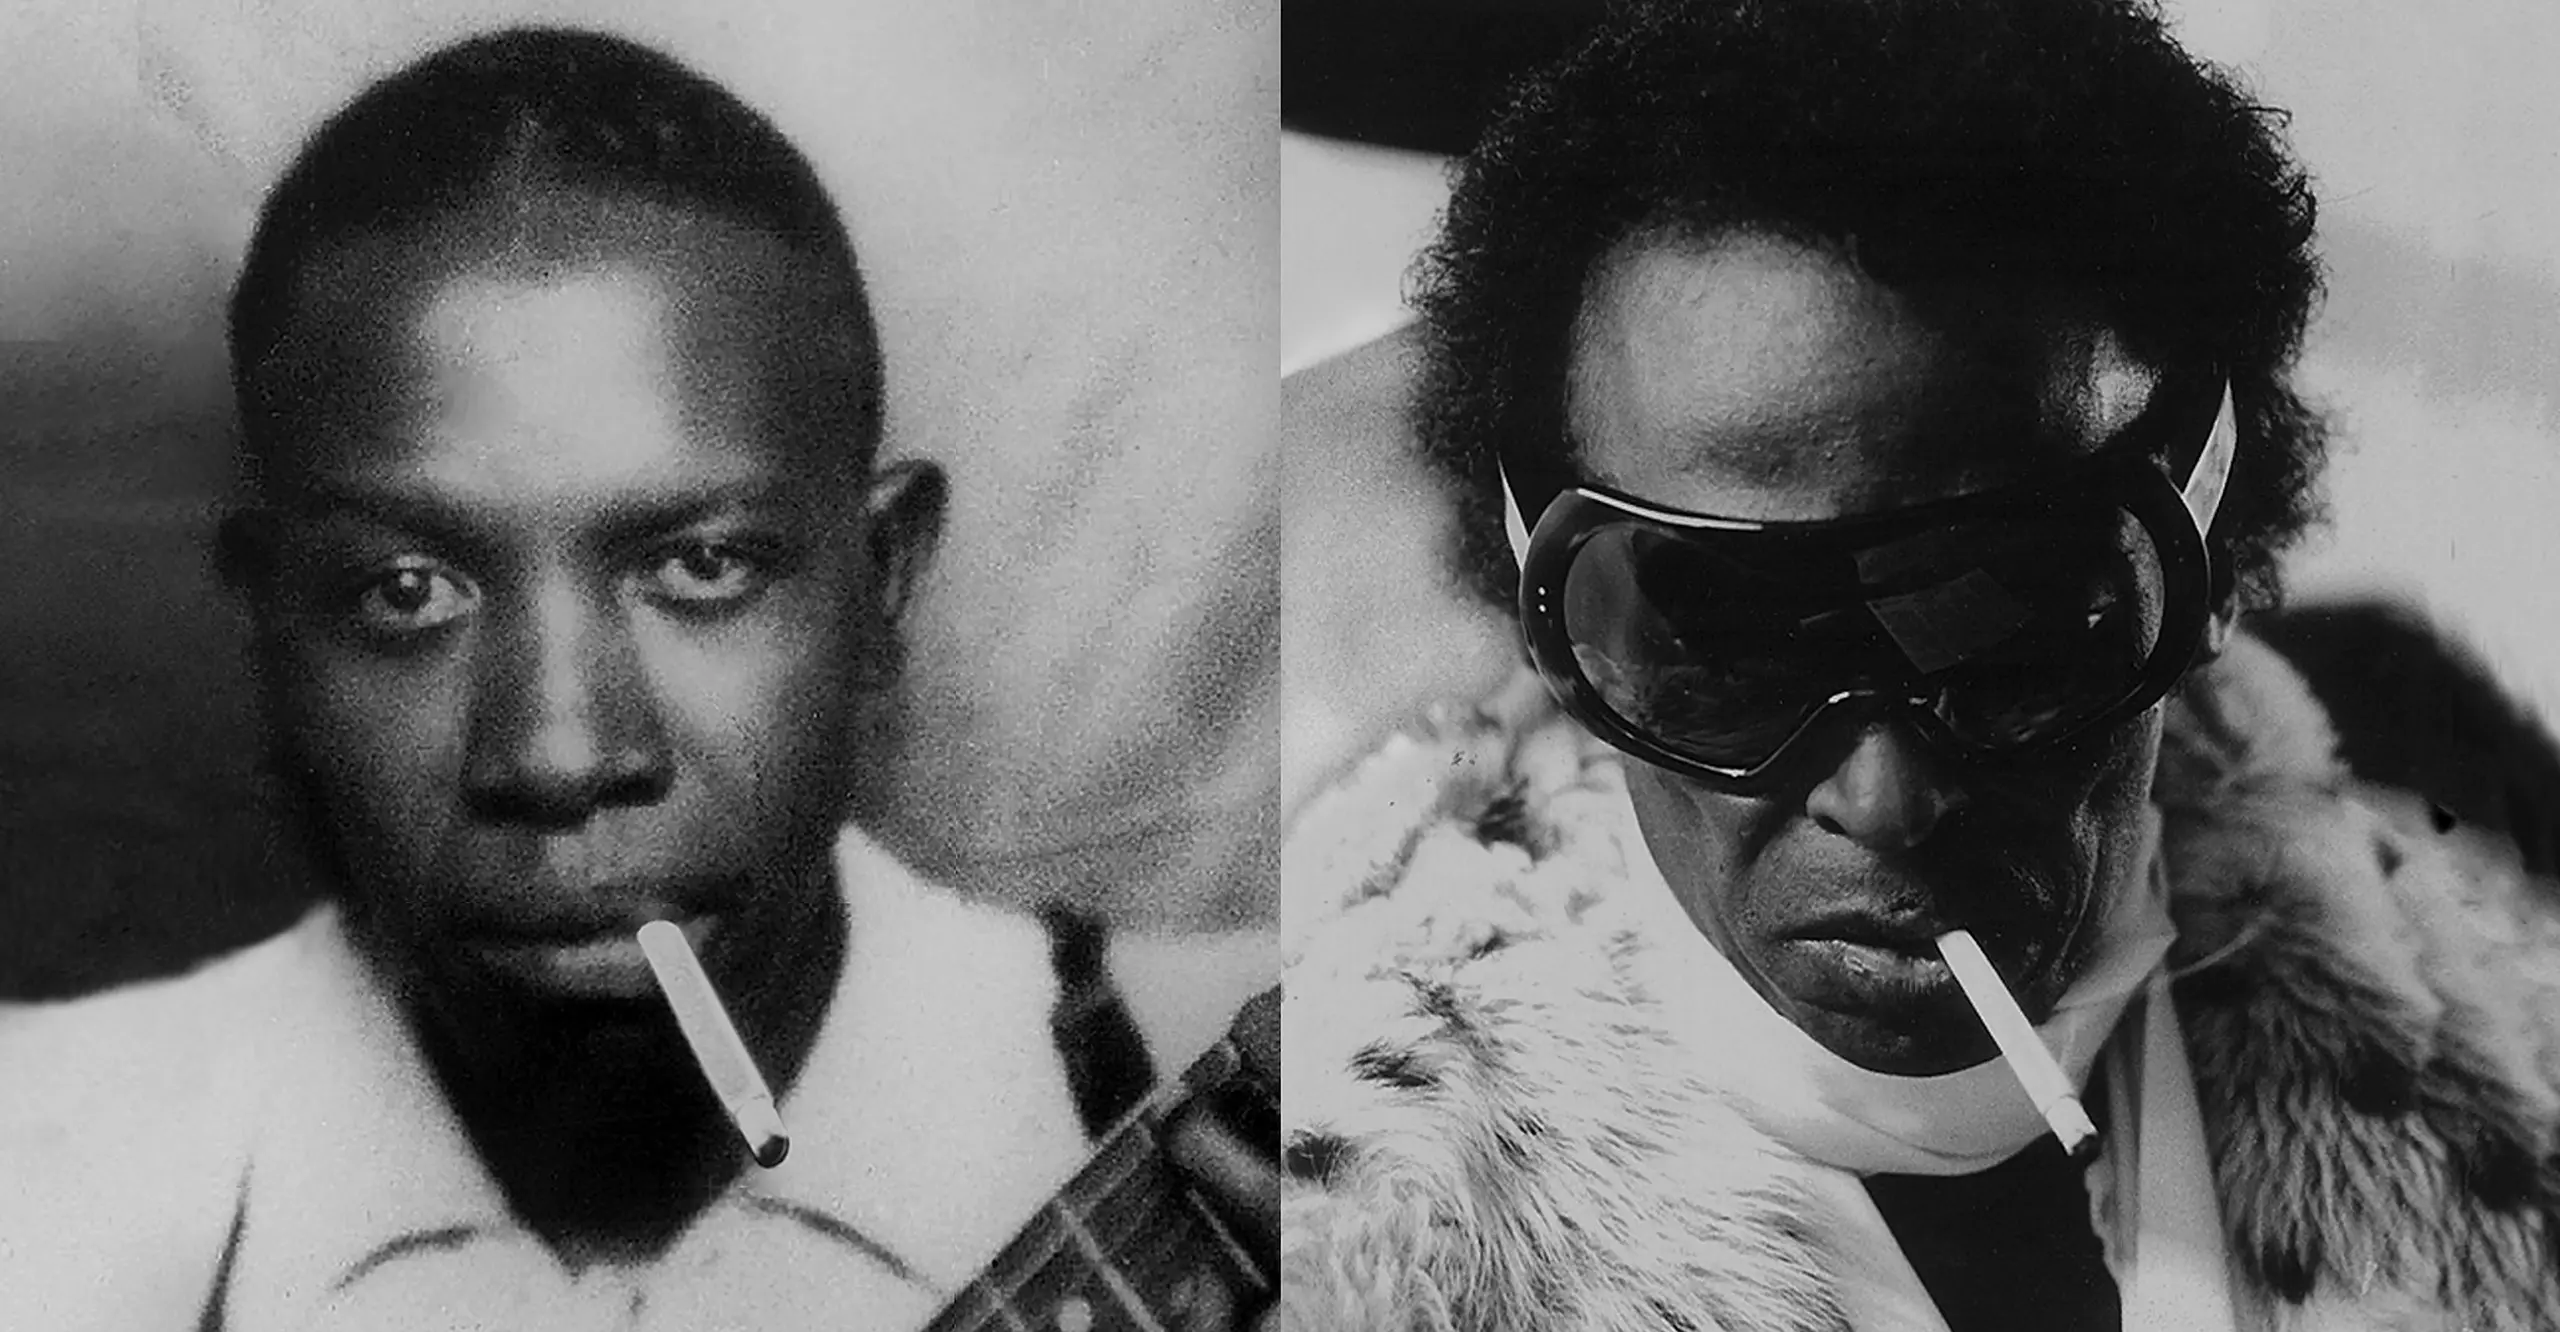 Split screen photograph of two Black men musicians looking straight at the camera smoking a cigarette at the same angle by Arthur Jafa at the photographers gallery